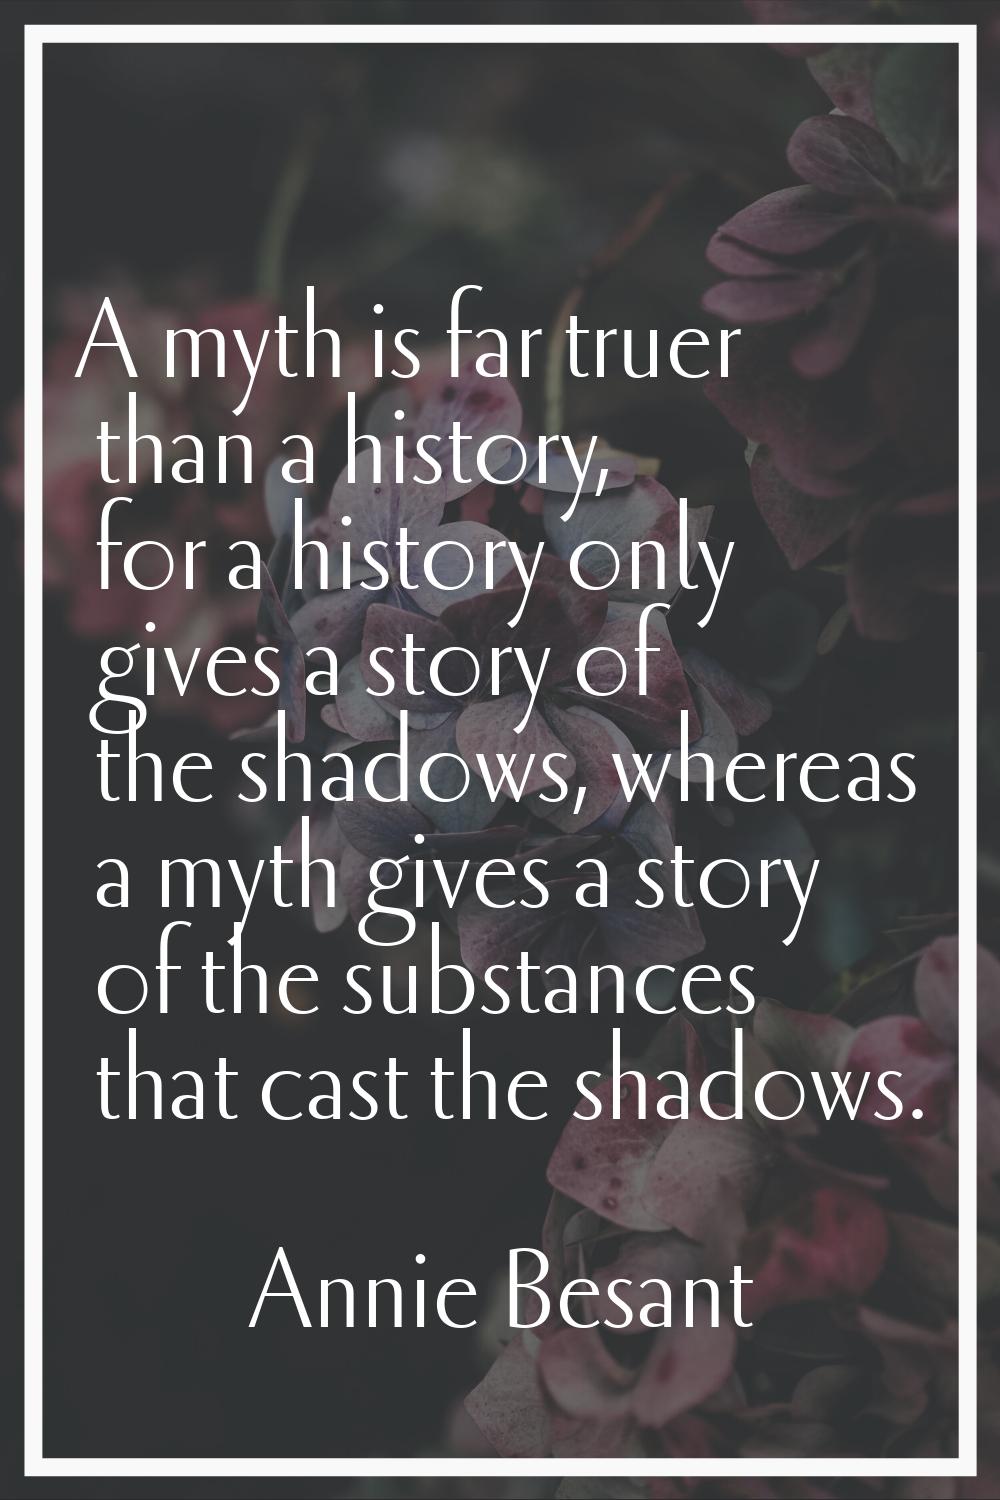 A myth is far truer than a history, for a history only gives a story of the shadows, whereas a myth